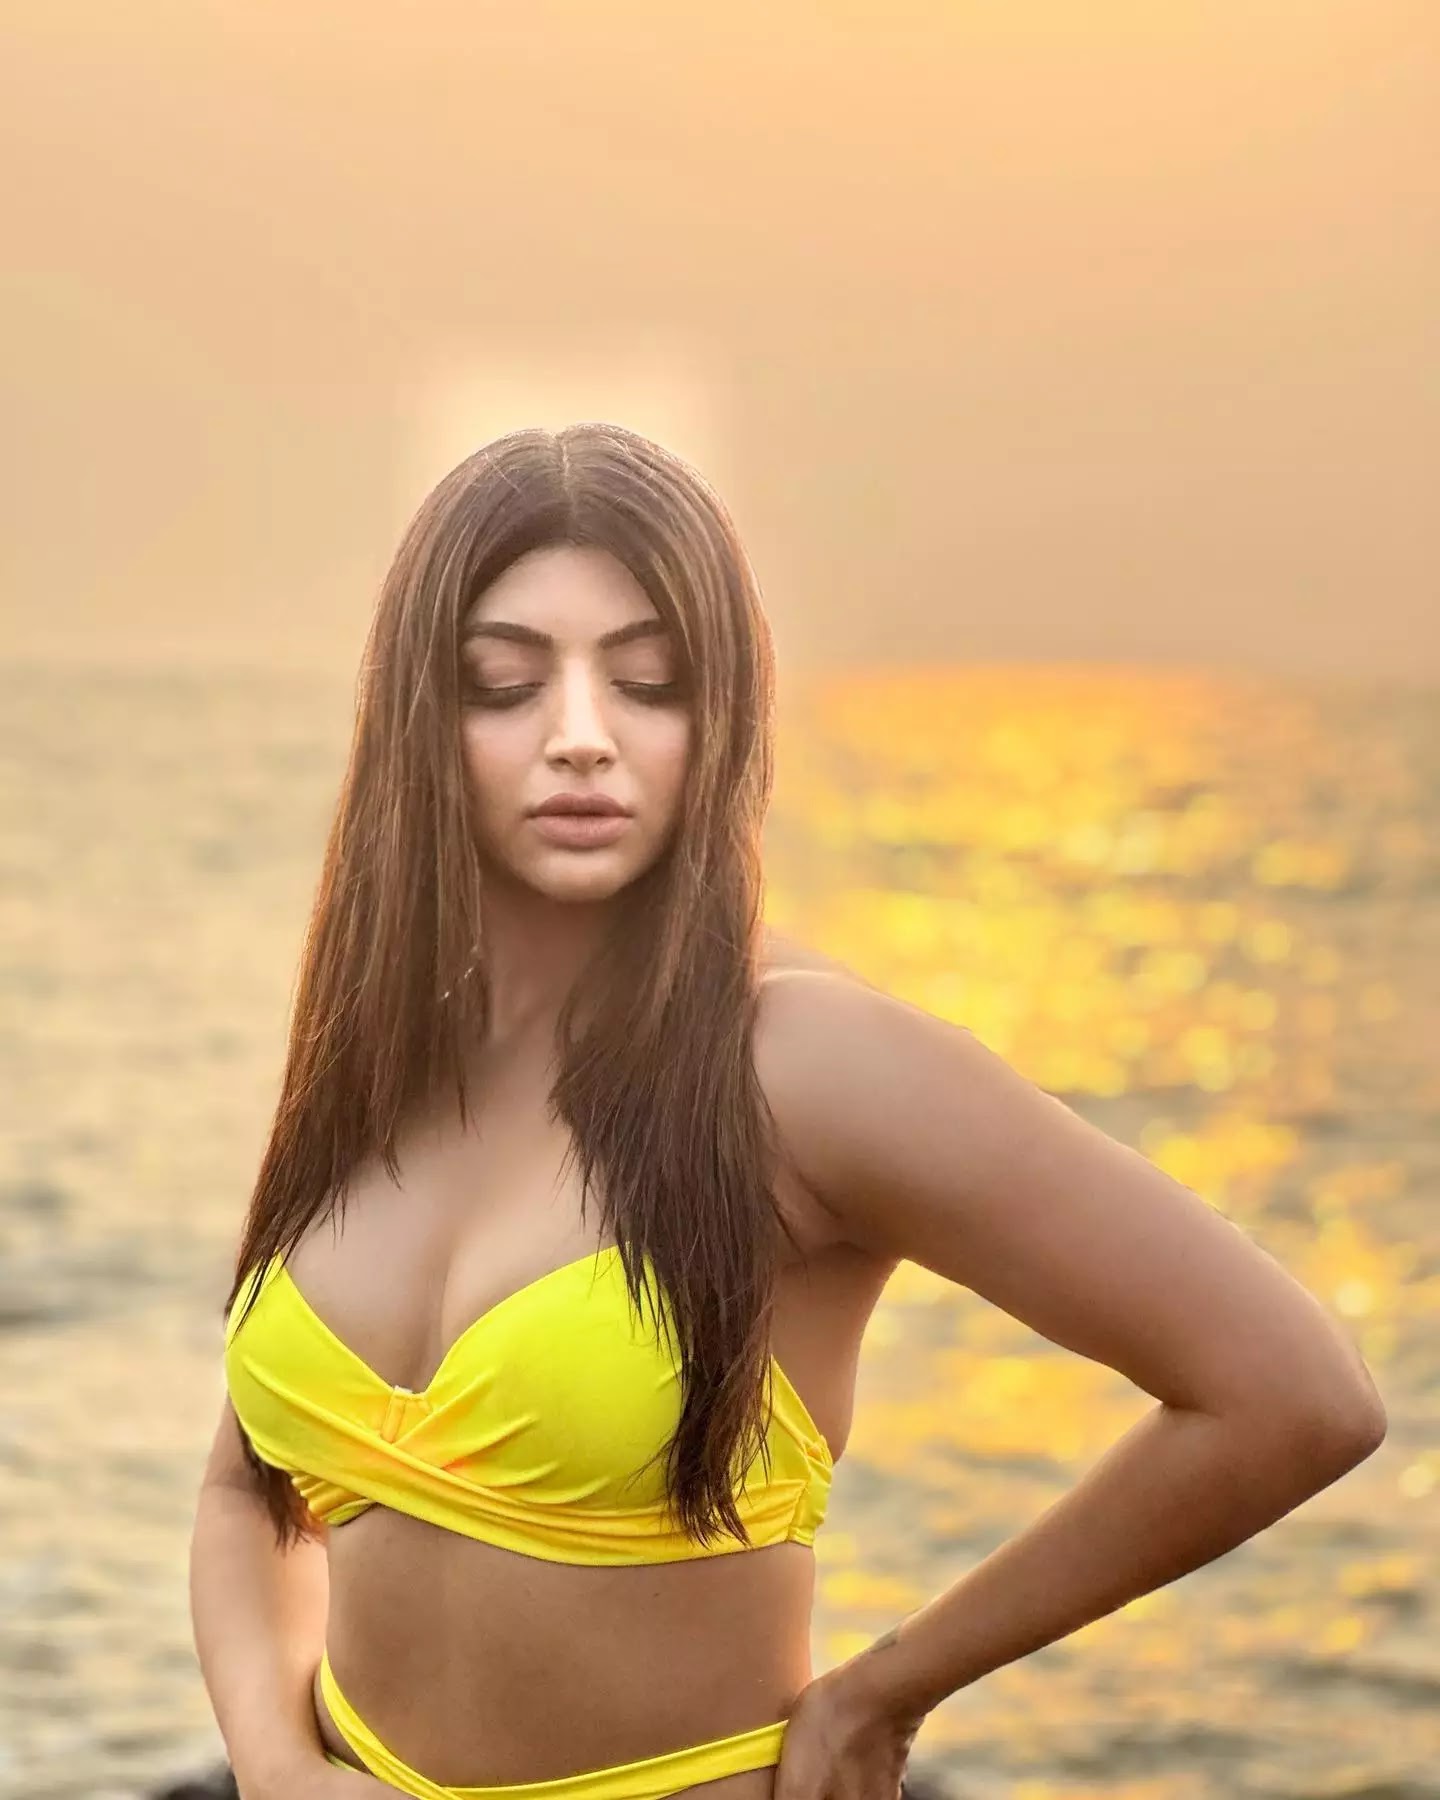 Akanksha Puri. Akanksha Puri hot bikini. Akanksha Puri hot videos. South Indian hot model Akanksha Puri. Akanksha Puri xxx.